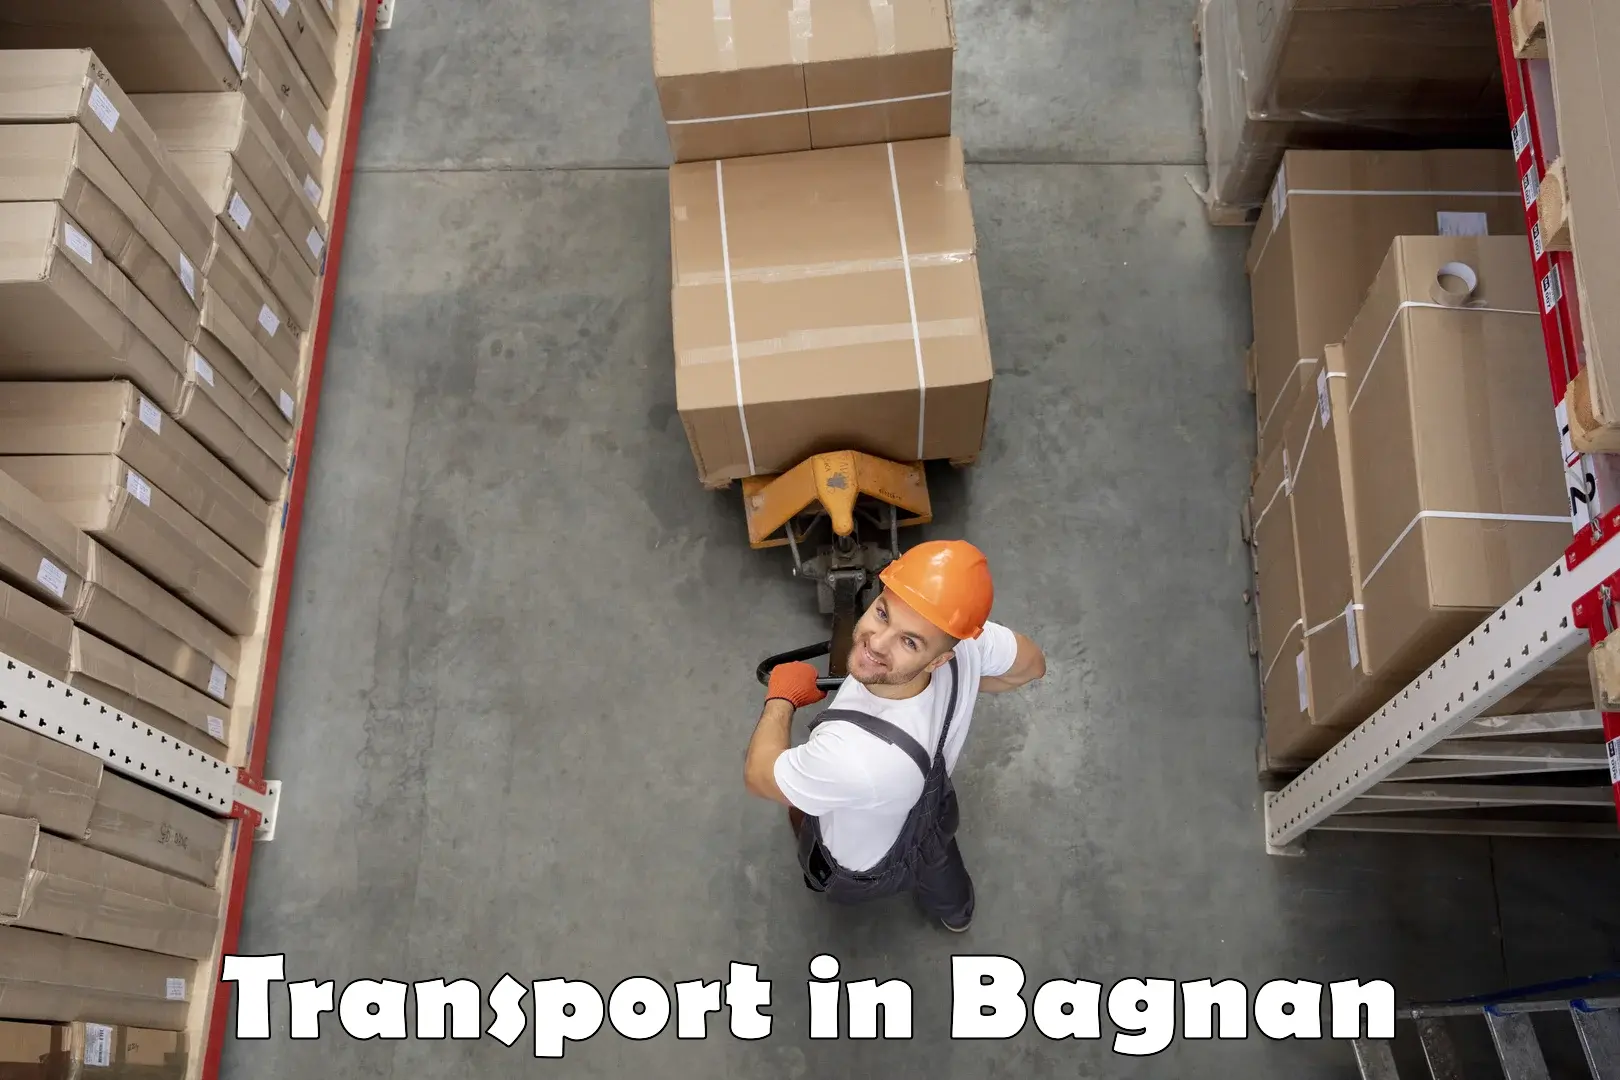 Vehicle transport services in Bagnan